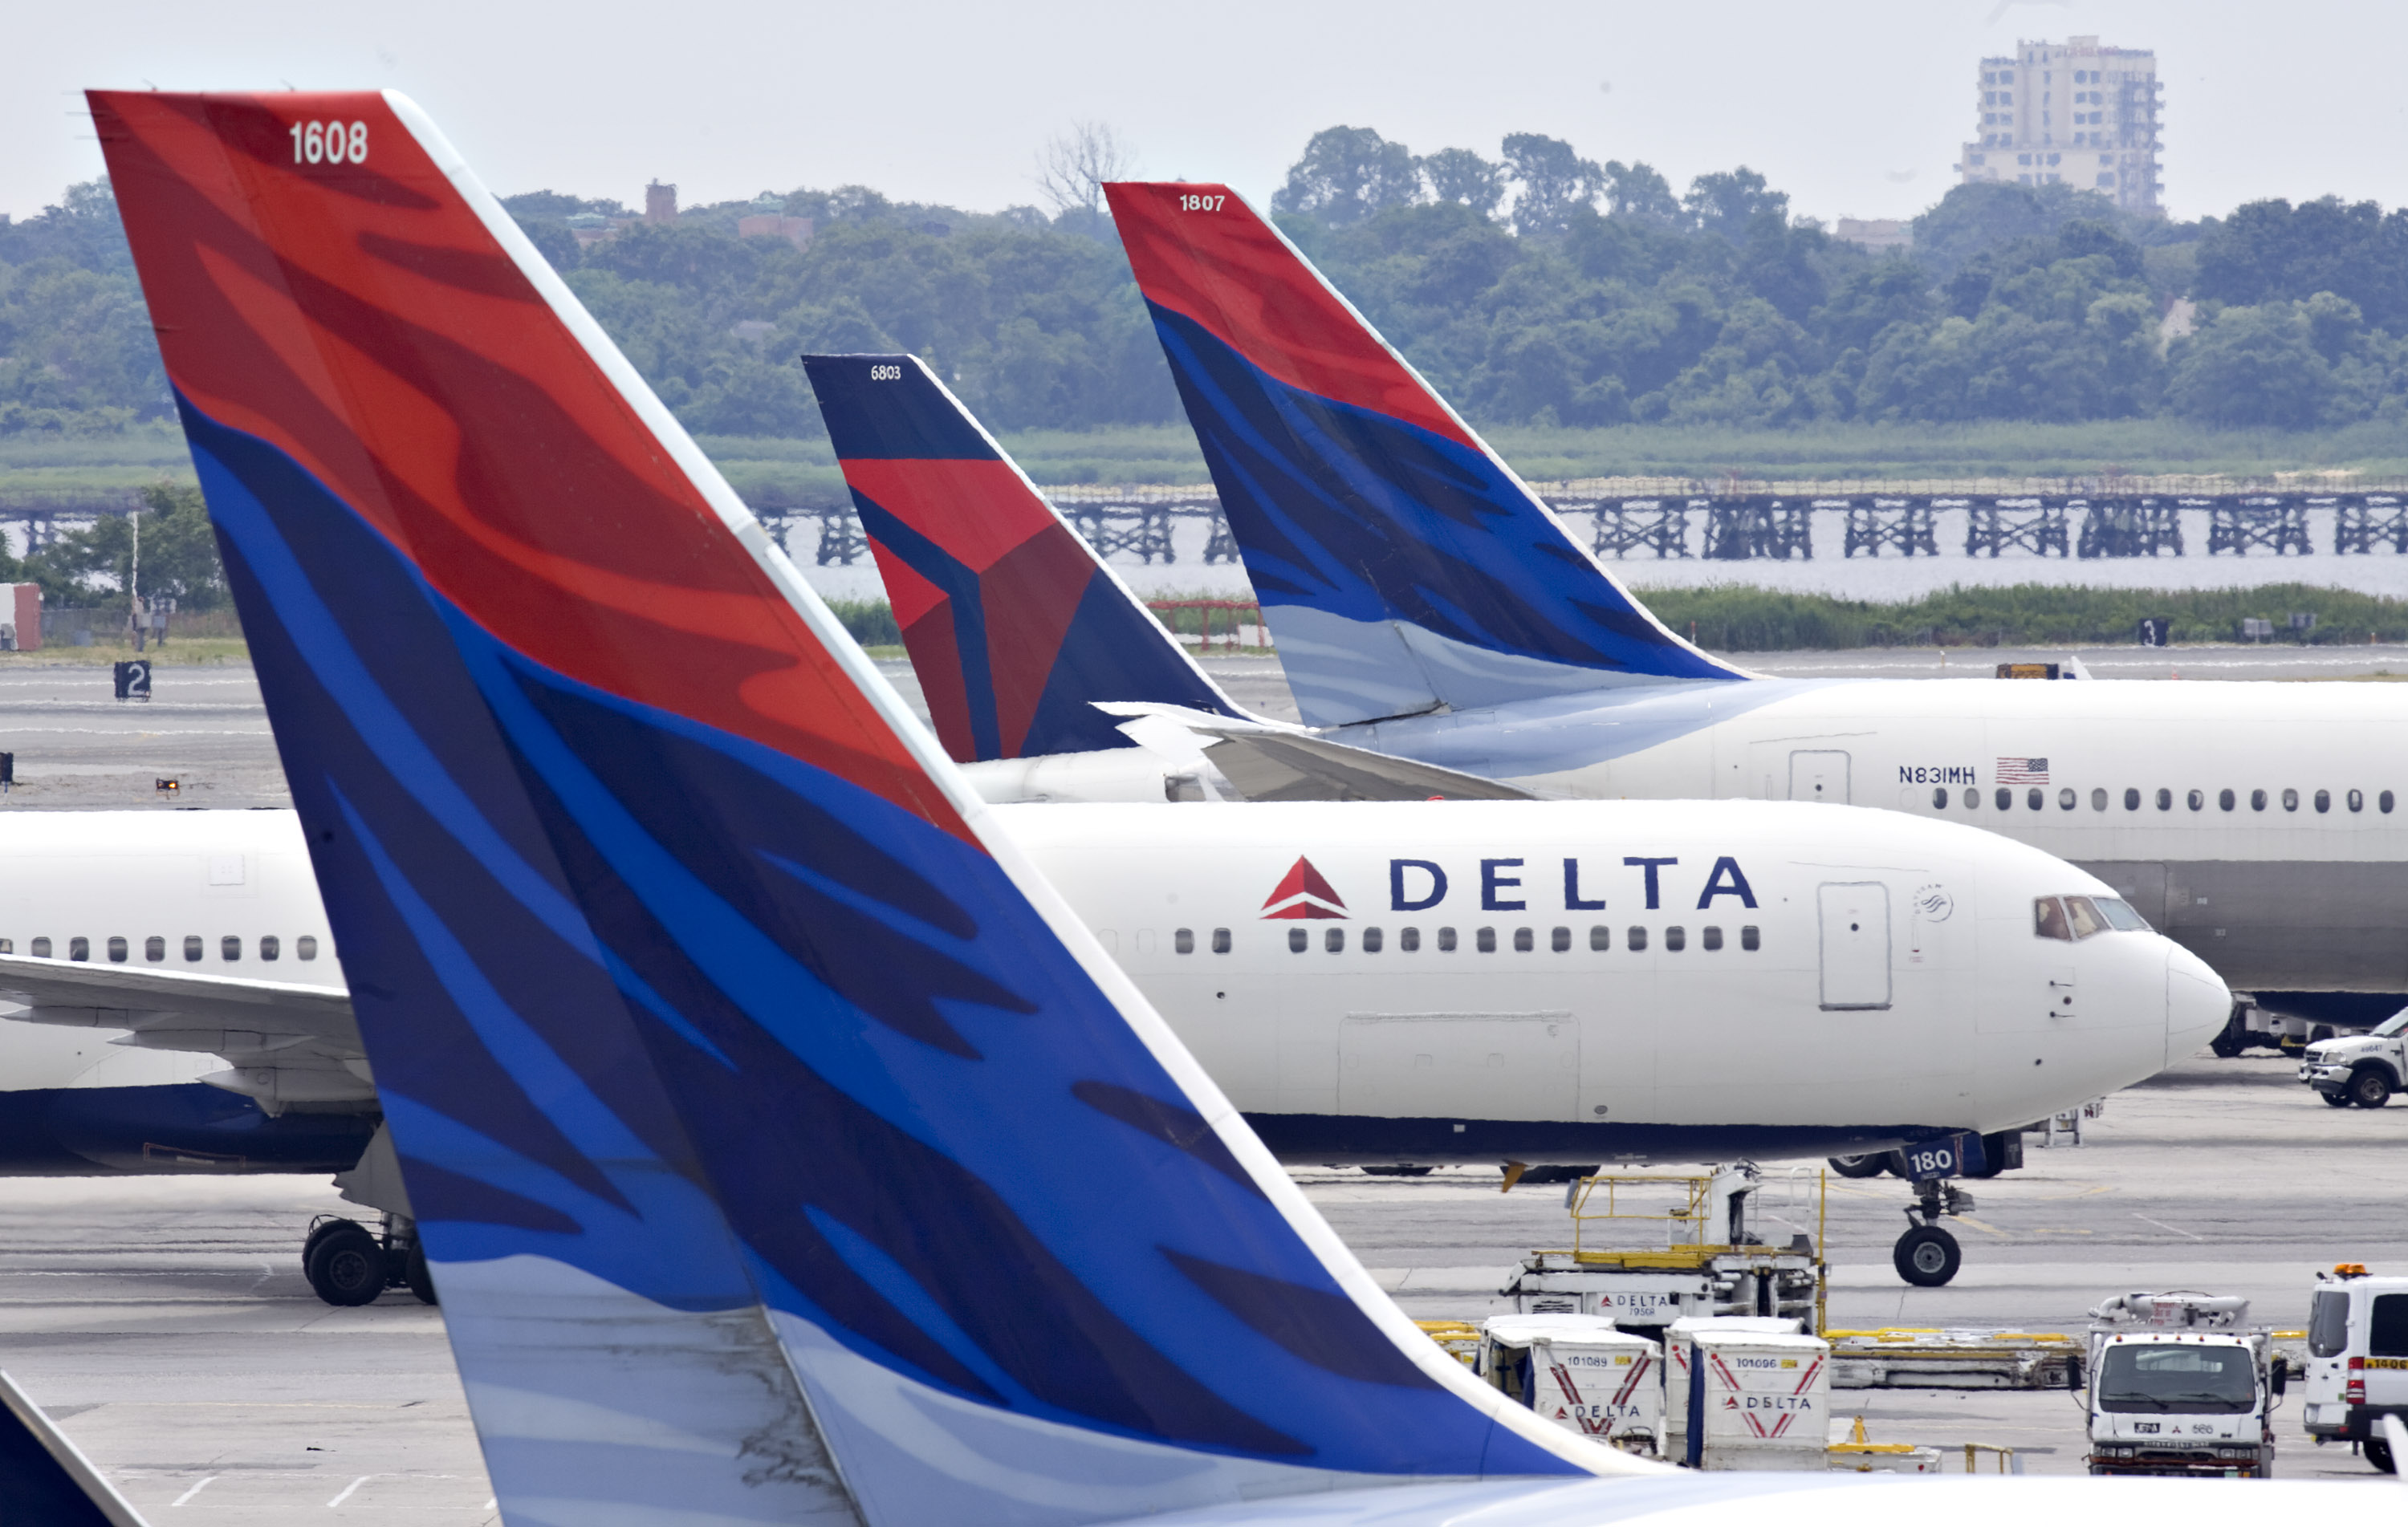 Delta Air Lines plane and tails